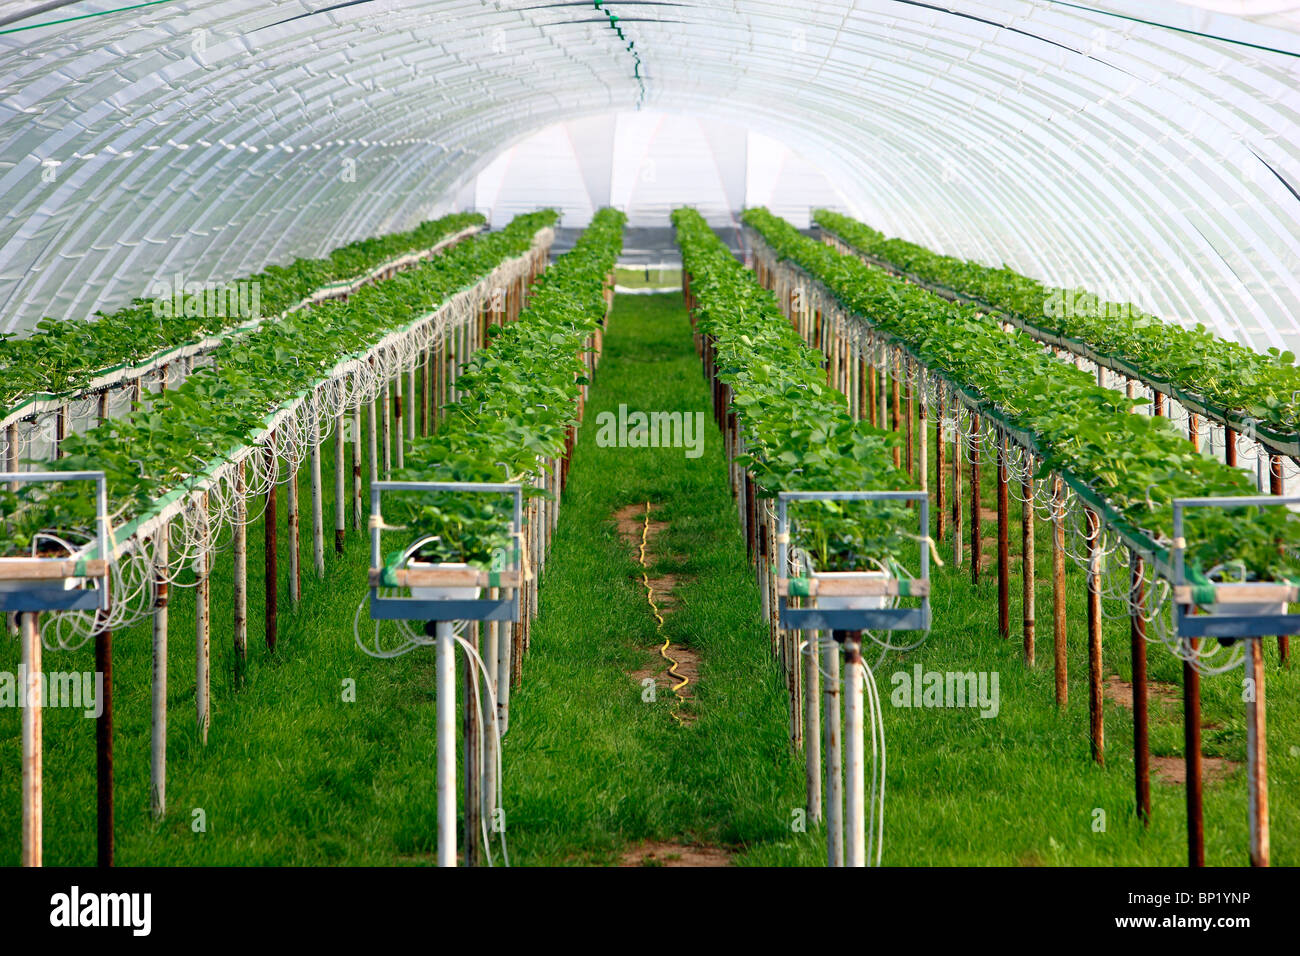 Greenhouse, for growing plants. Stock Photo